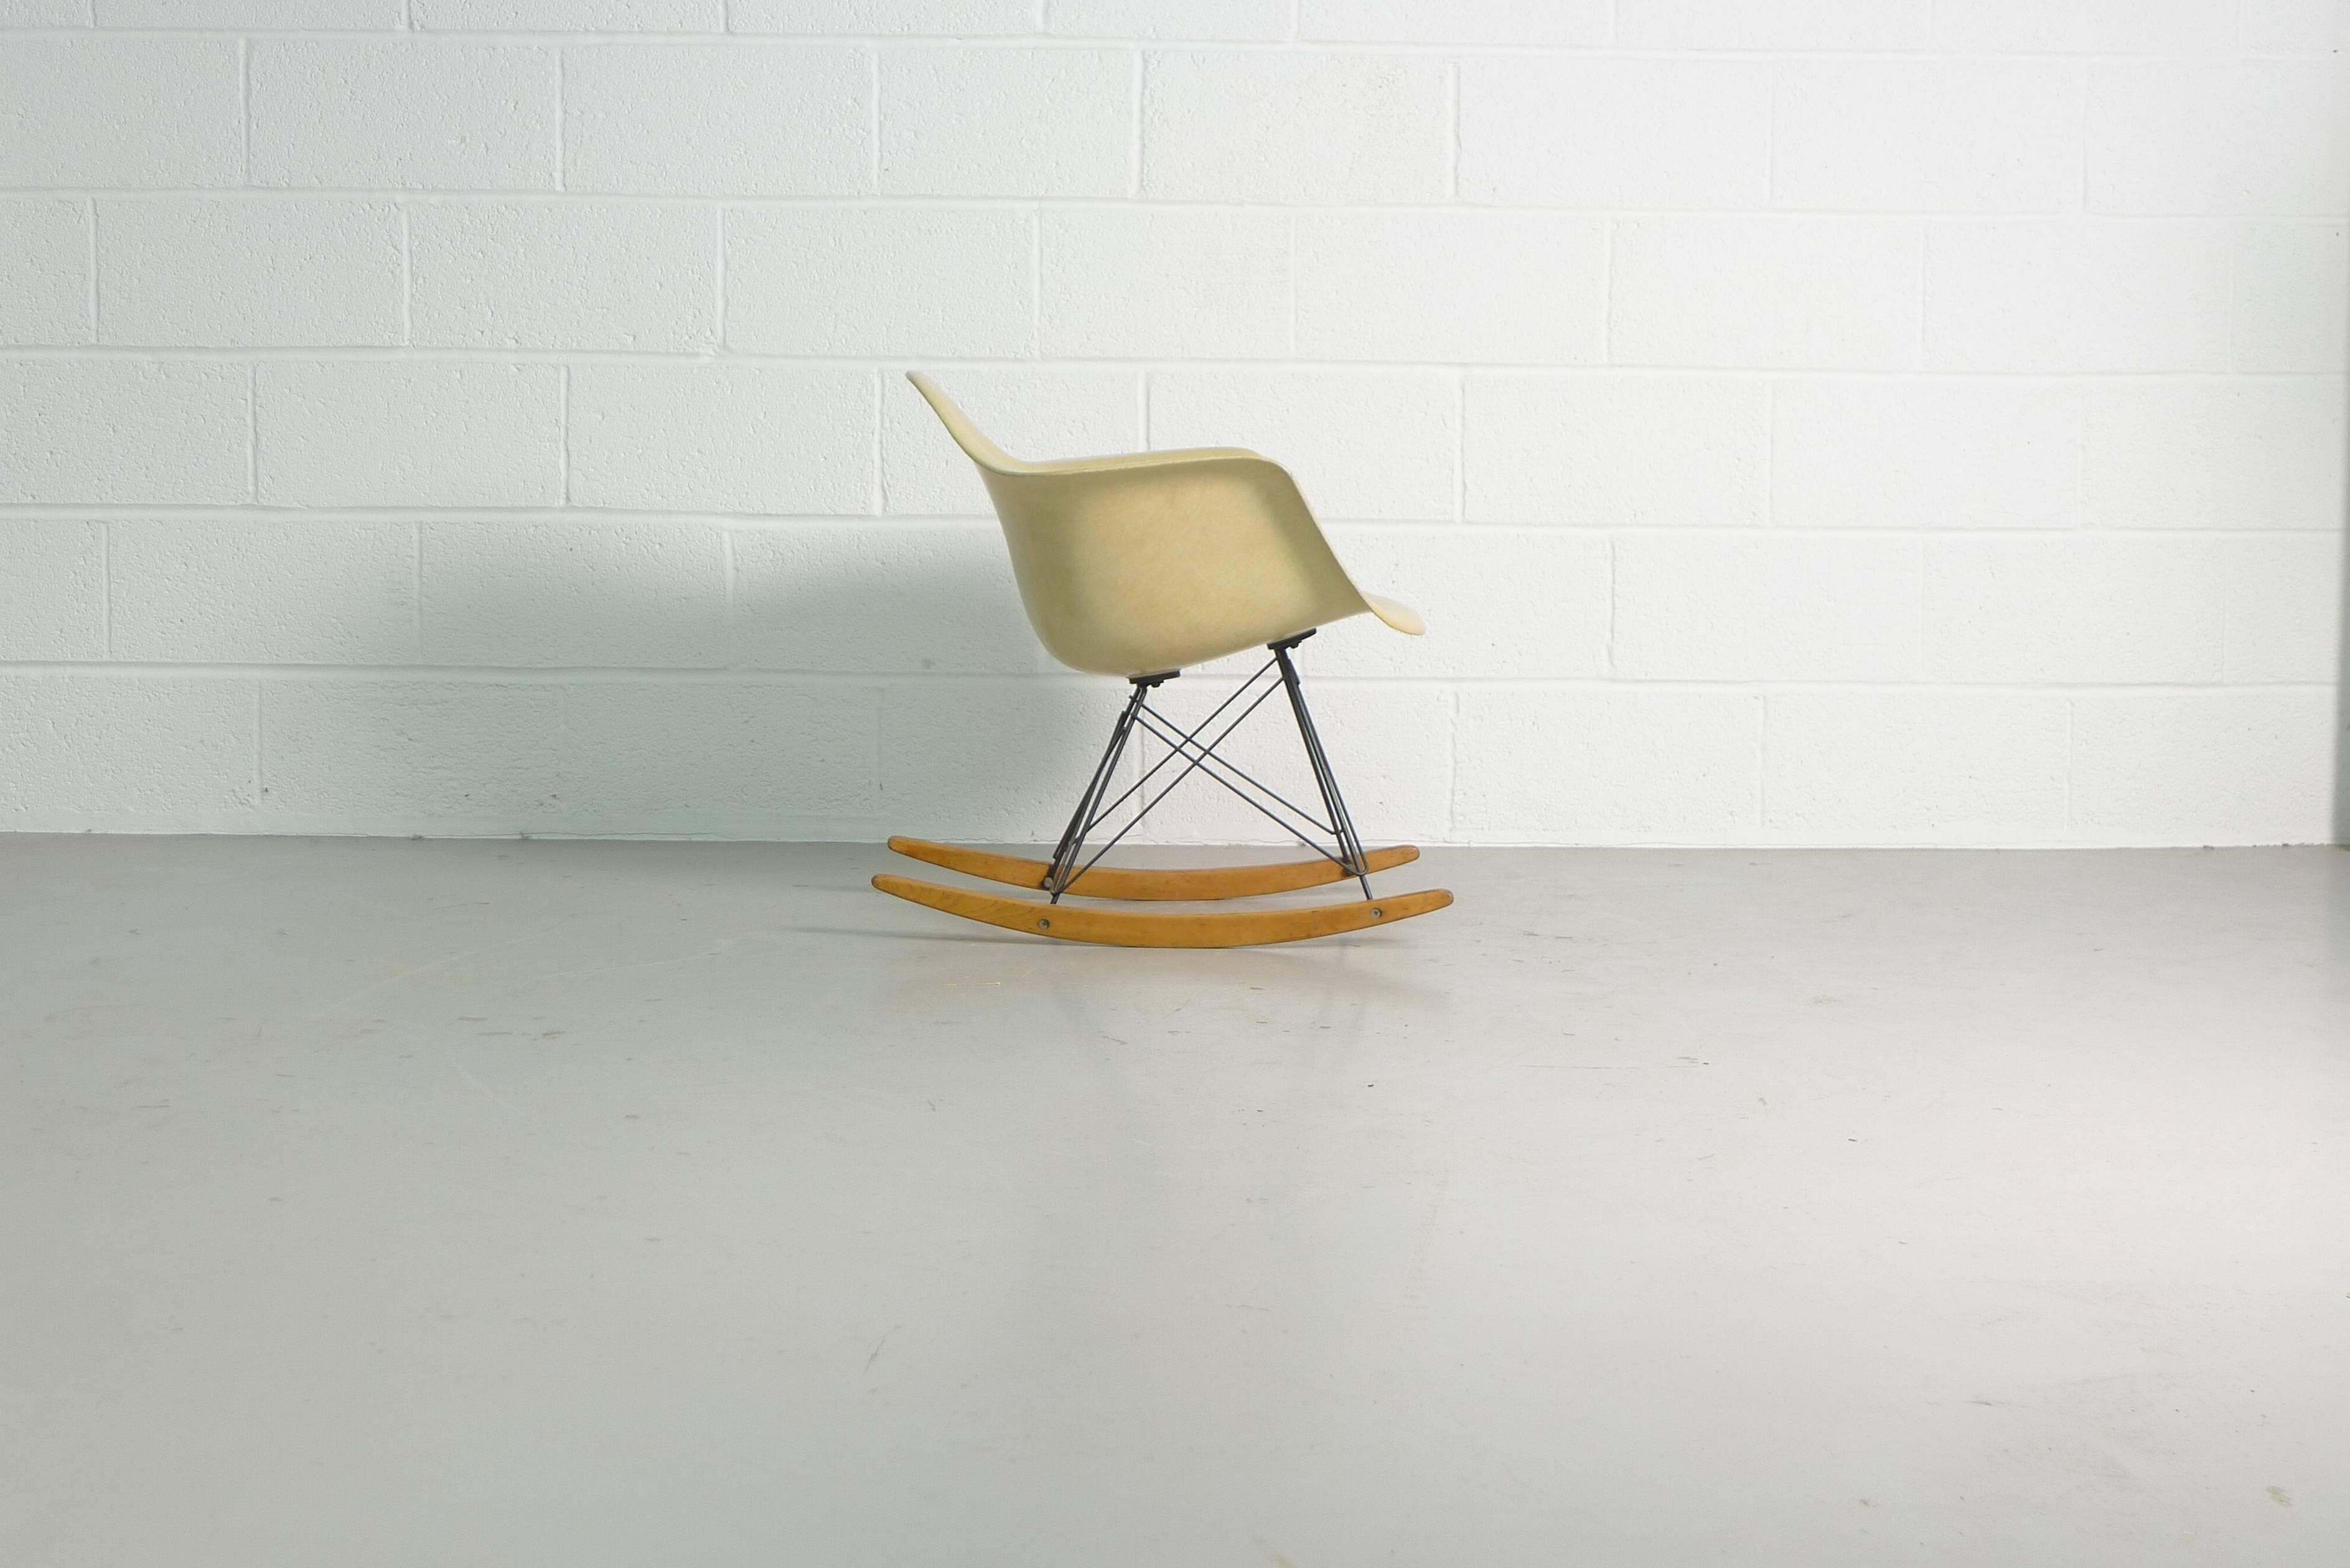 Charles and Ray Eames for Herman Miller / Zenith Products, circa 1952-1953. A second generation Eames RAR rocker with the large shock mounts but no rope edge, in production in this format very briefly before Herman Miller took over fully and the4